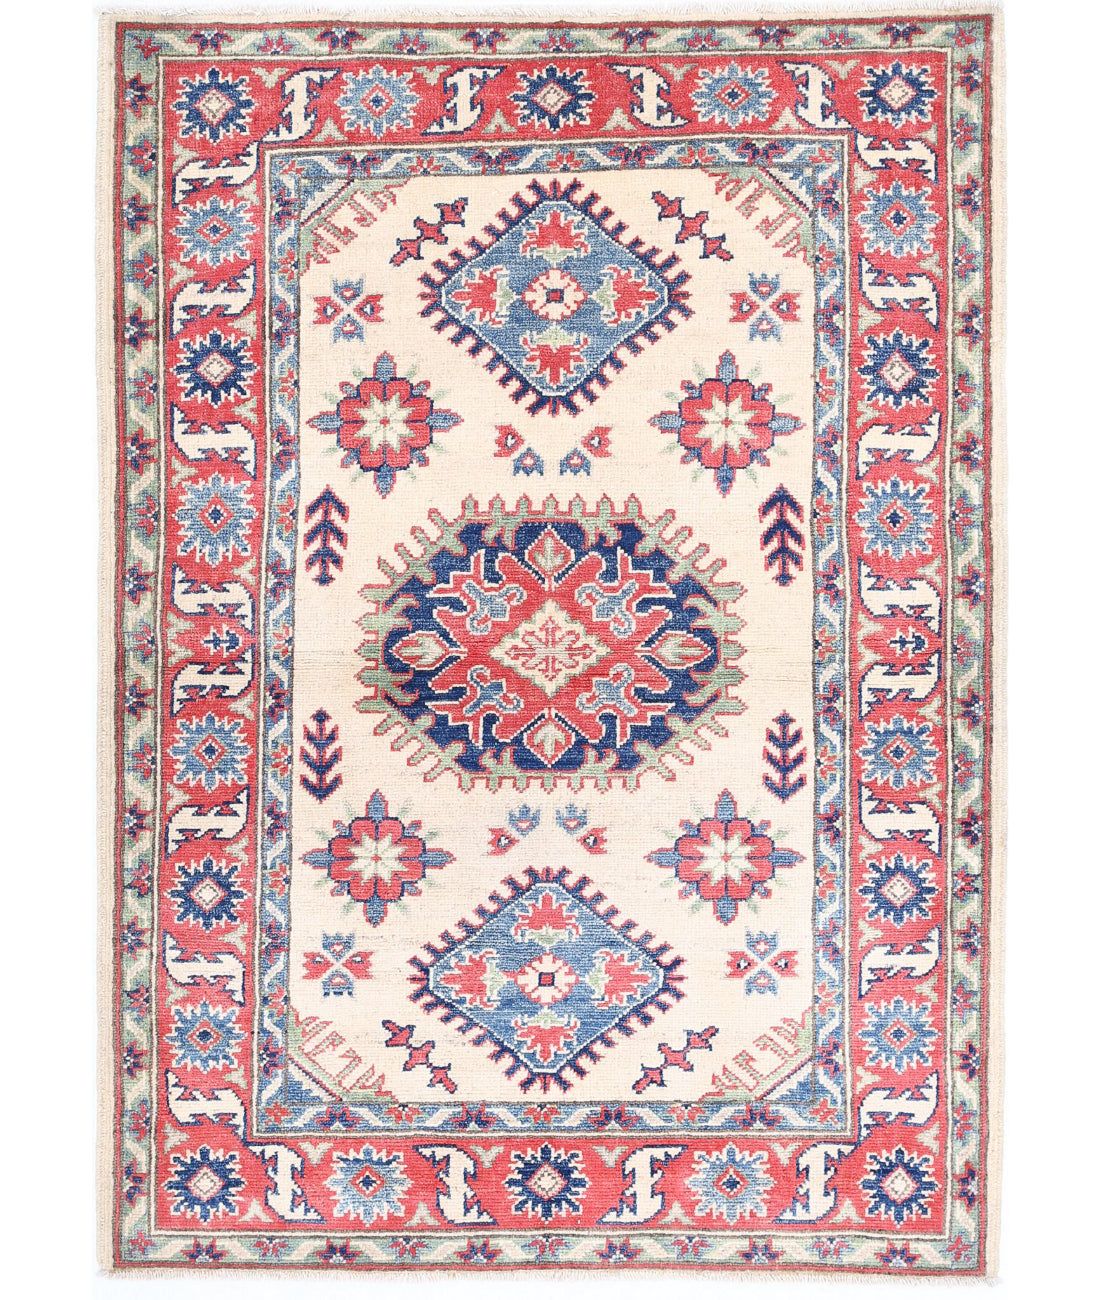 Hand Knotted Tribal Kazak Wool Rug - 3'4'' x 4'8'' 3'4'' x 4'8'' (100 X 140) / Ivory / Red